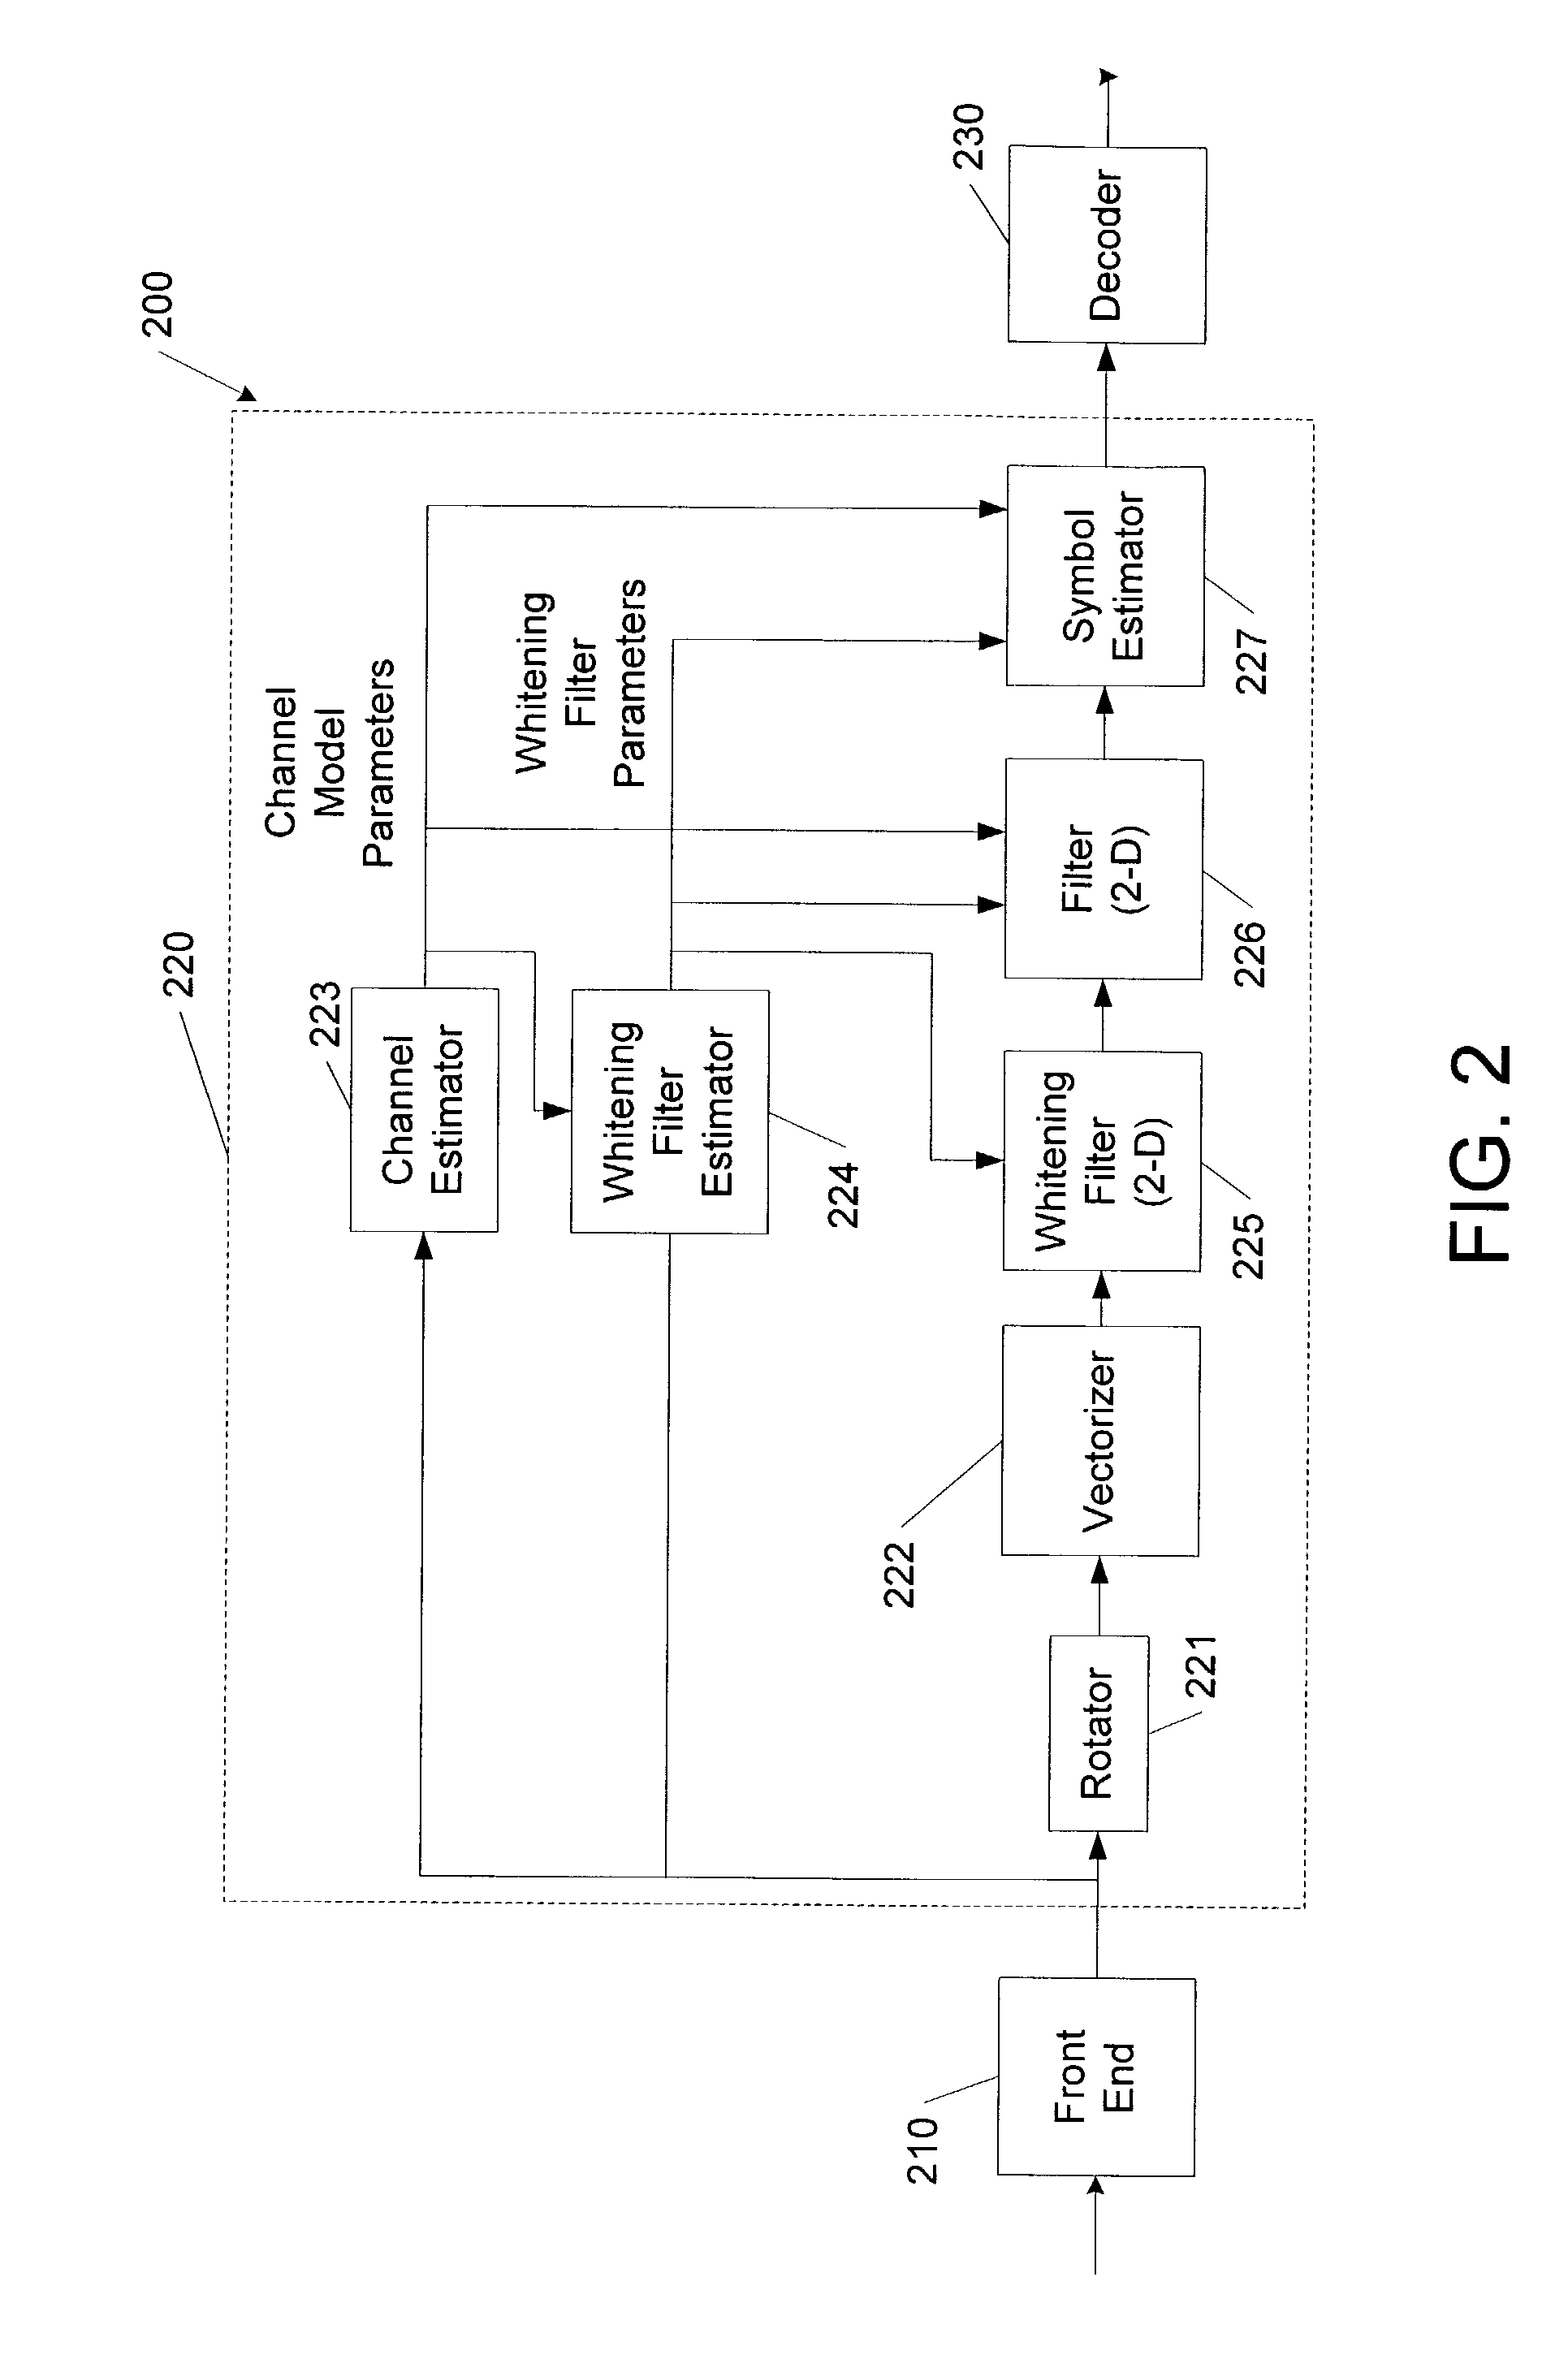 Apparatus and methods for suppression of interference among disparately-modulated signals